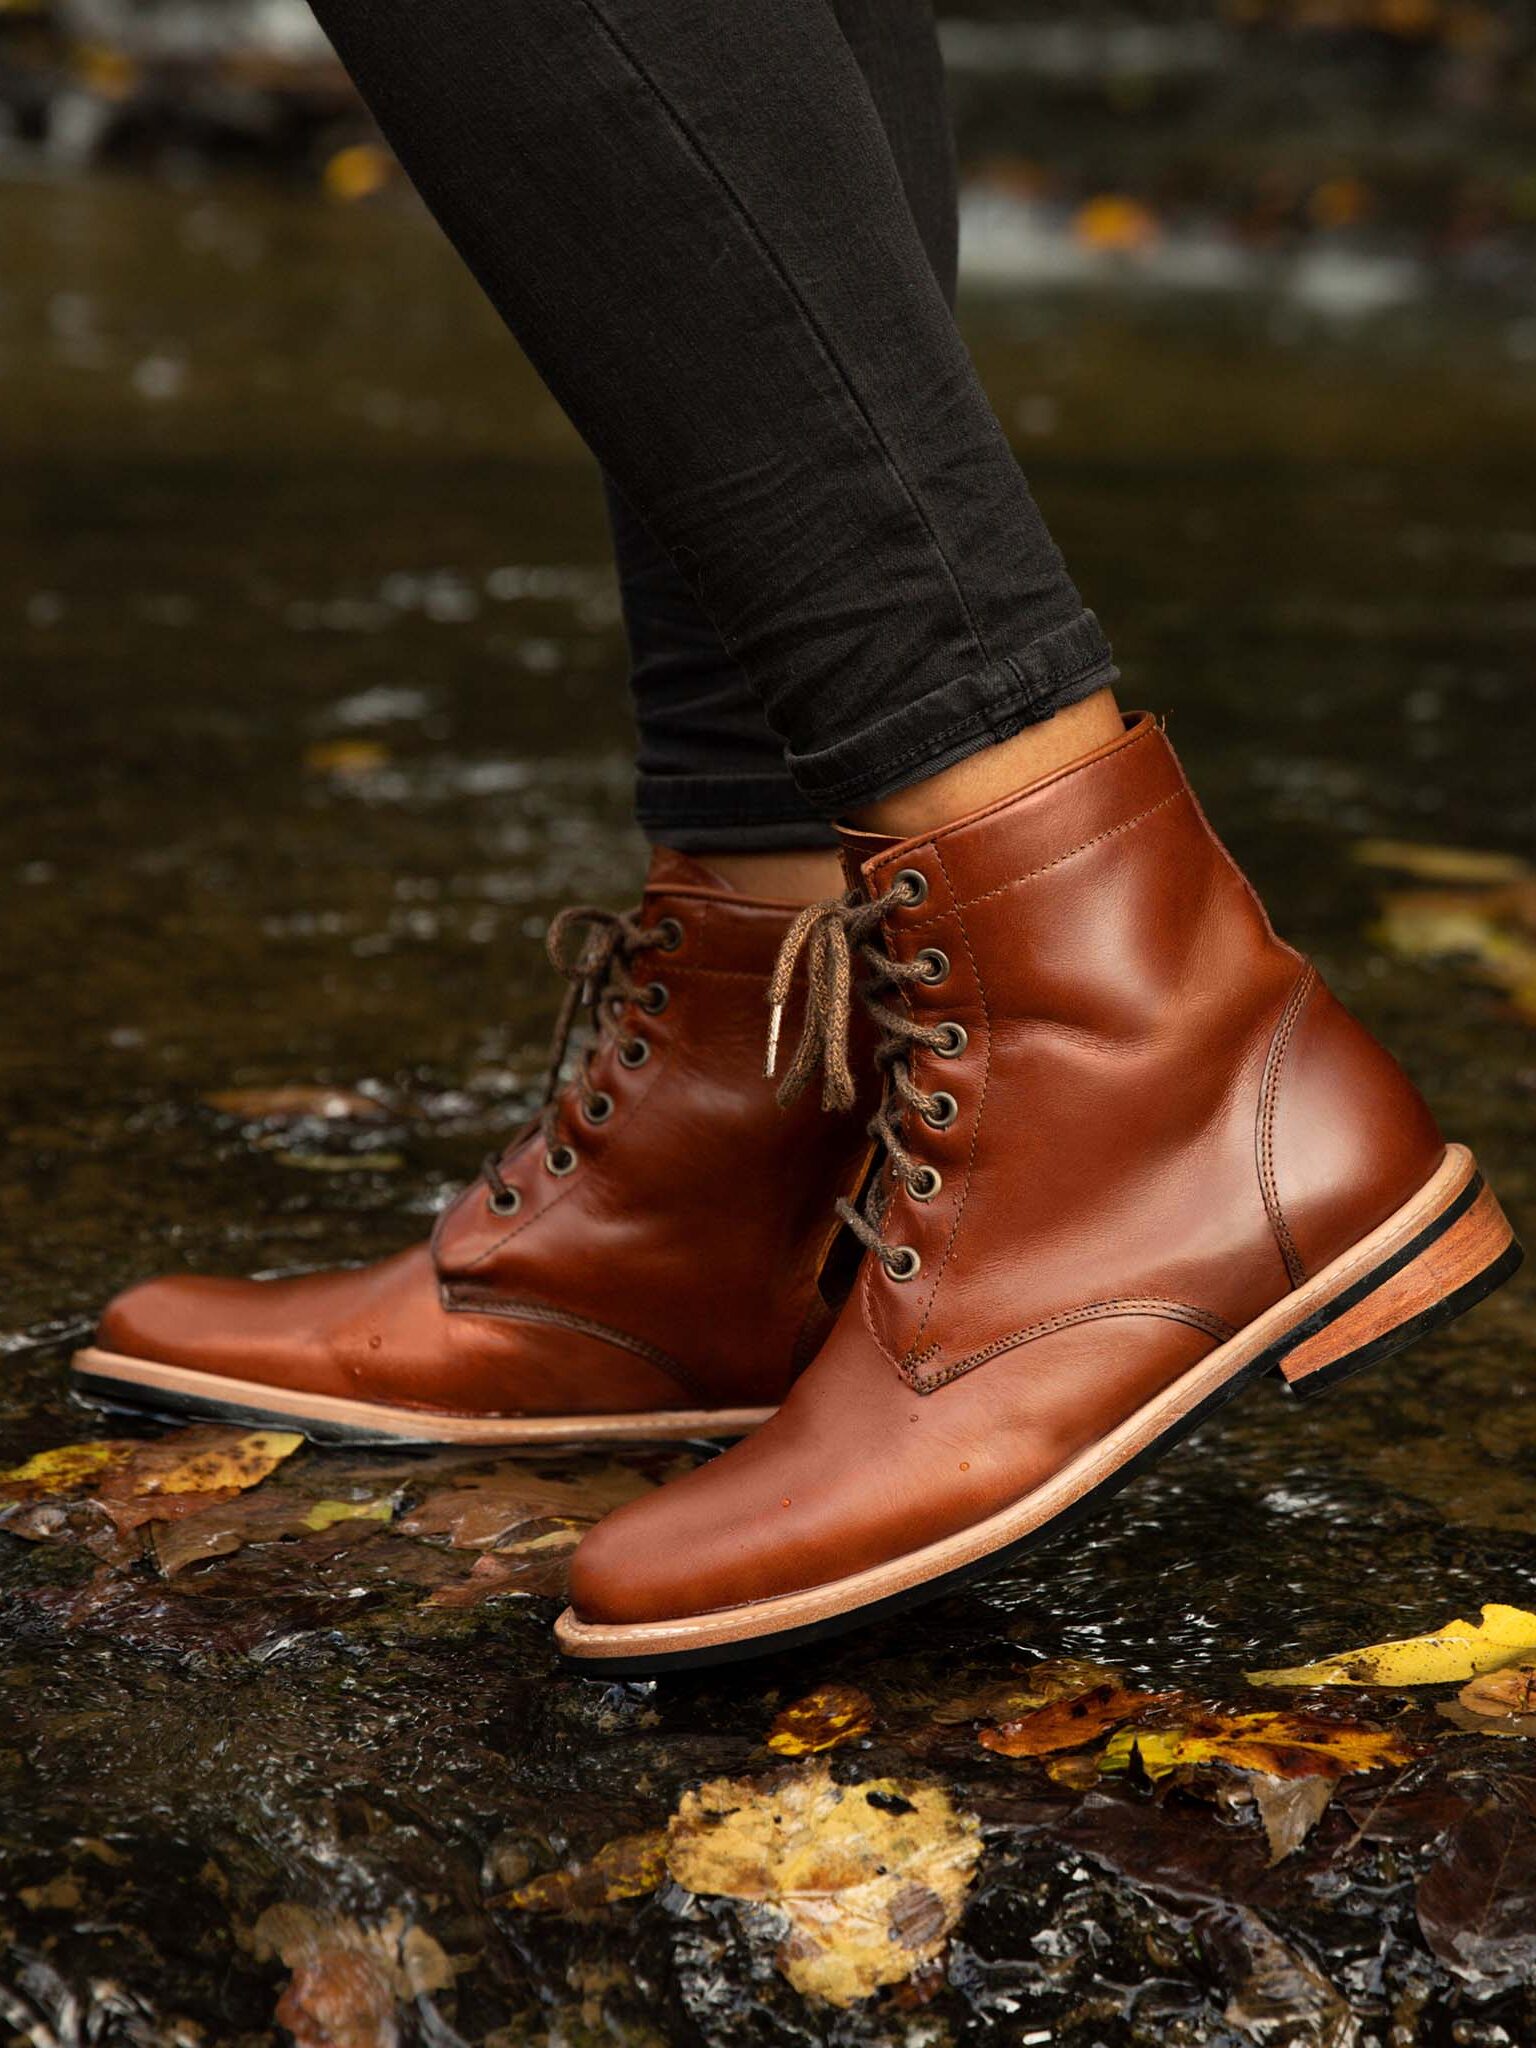 11 Sustainable Boots For Women (2023) - The Good Trade